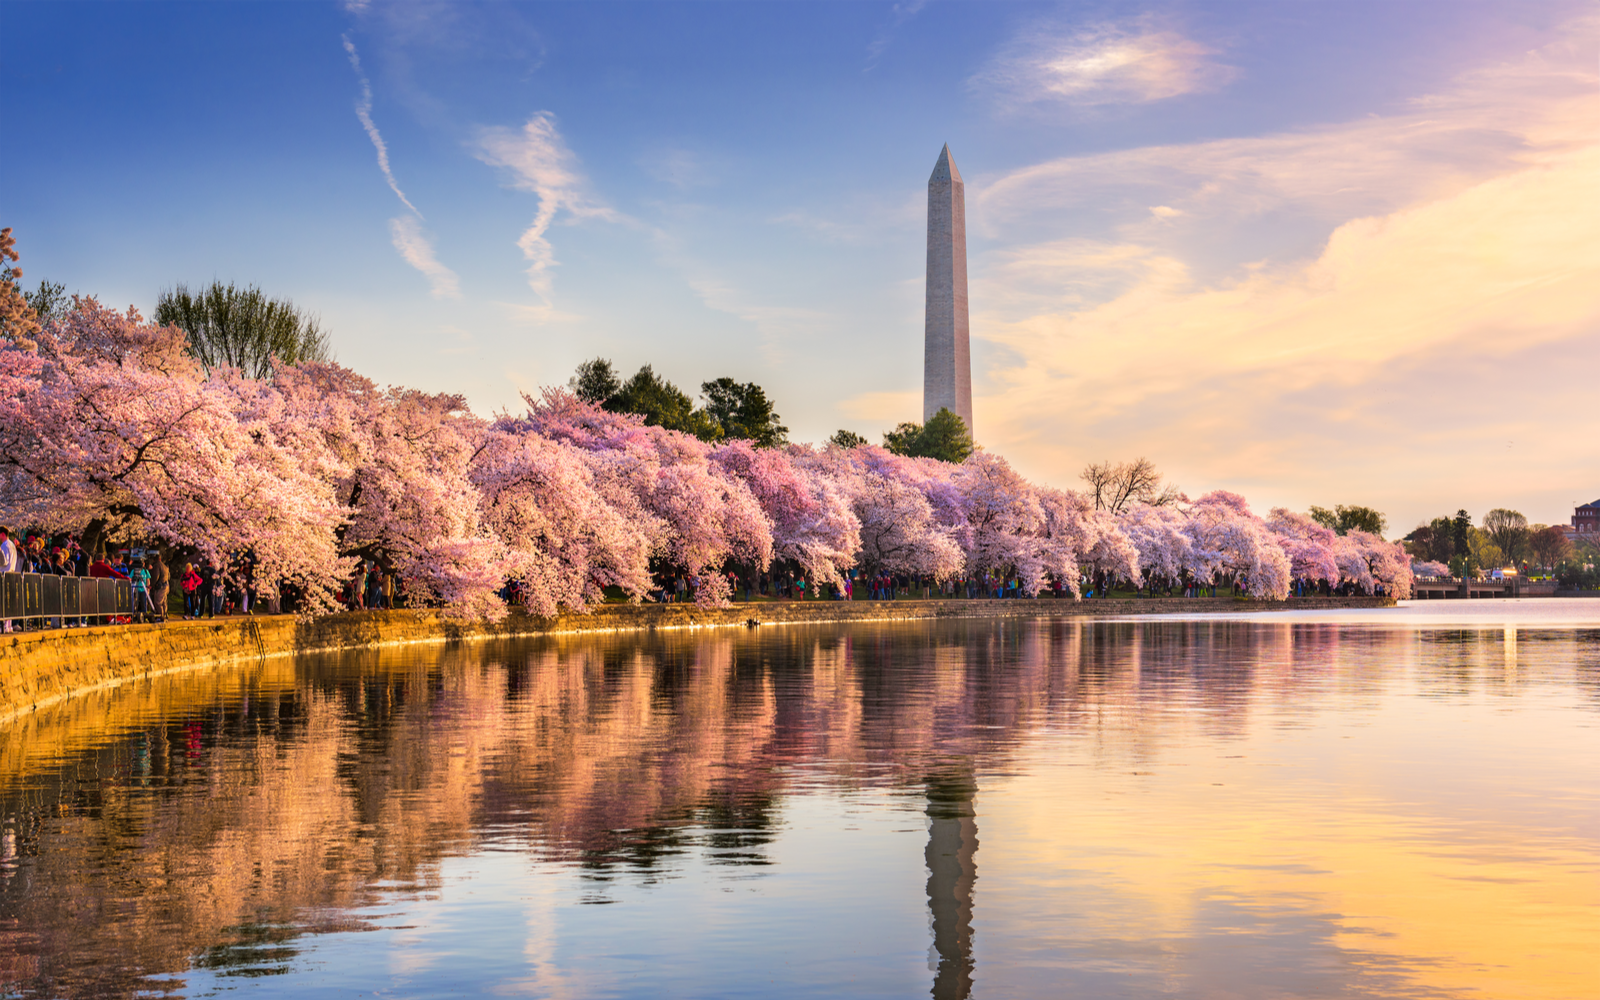 17 Things to Do in Washington, D.C. in 2023